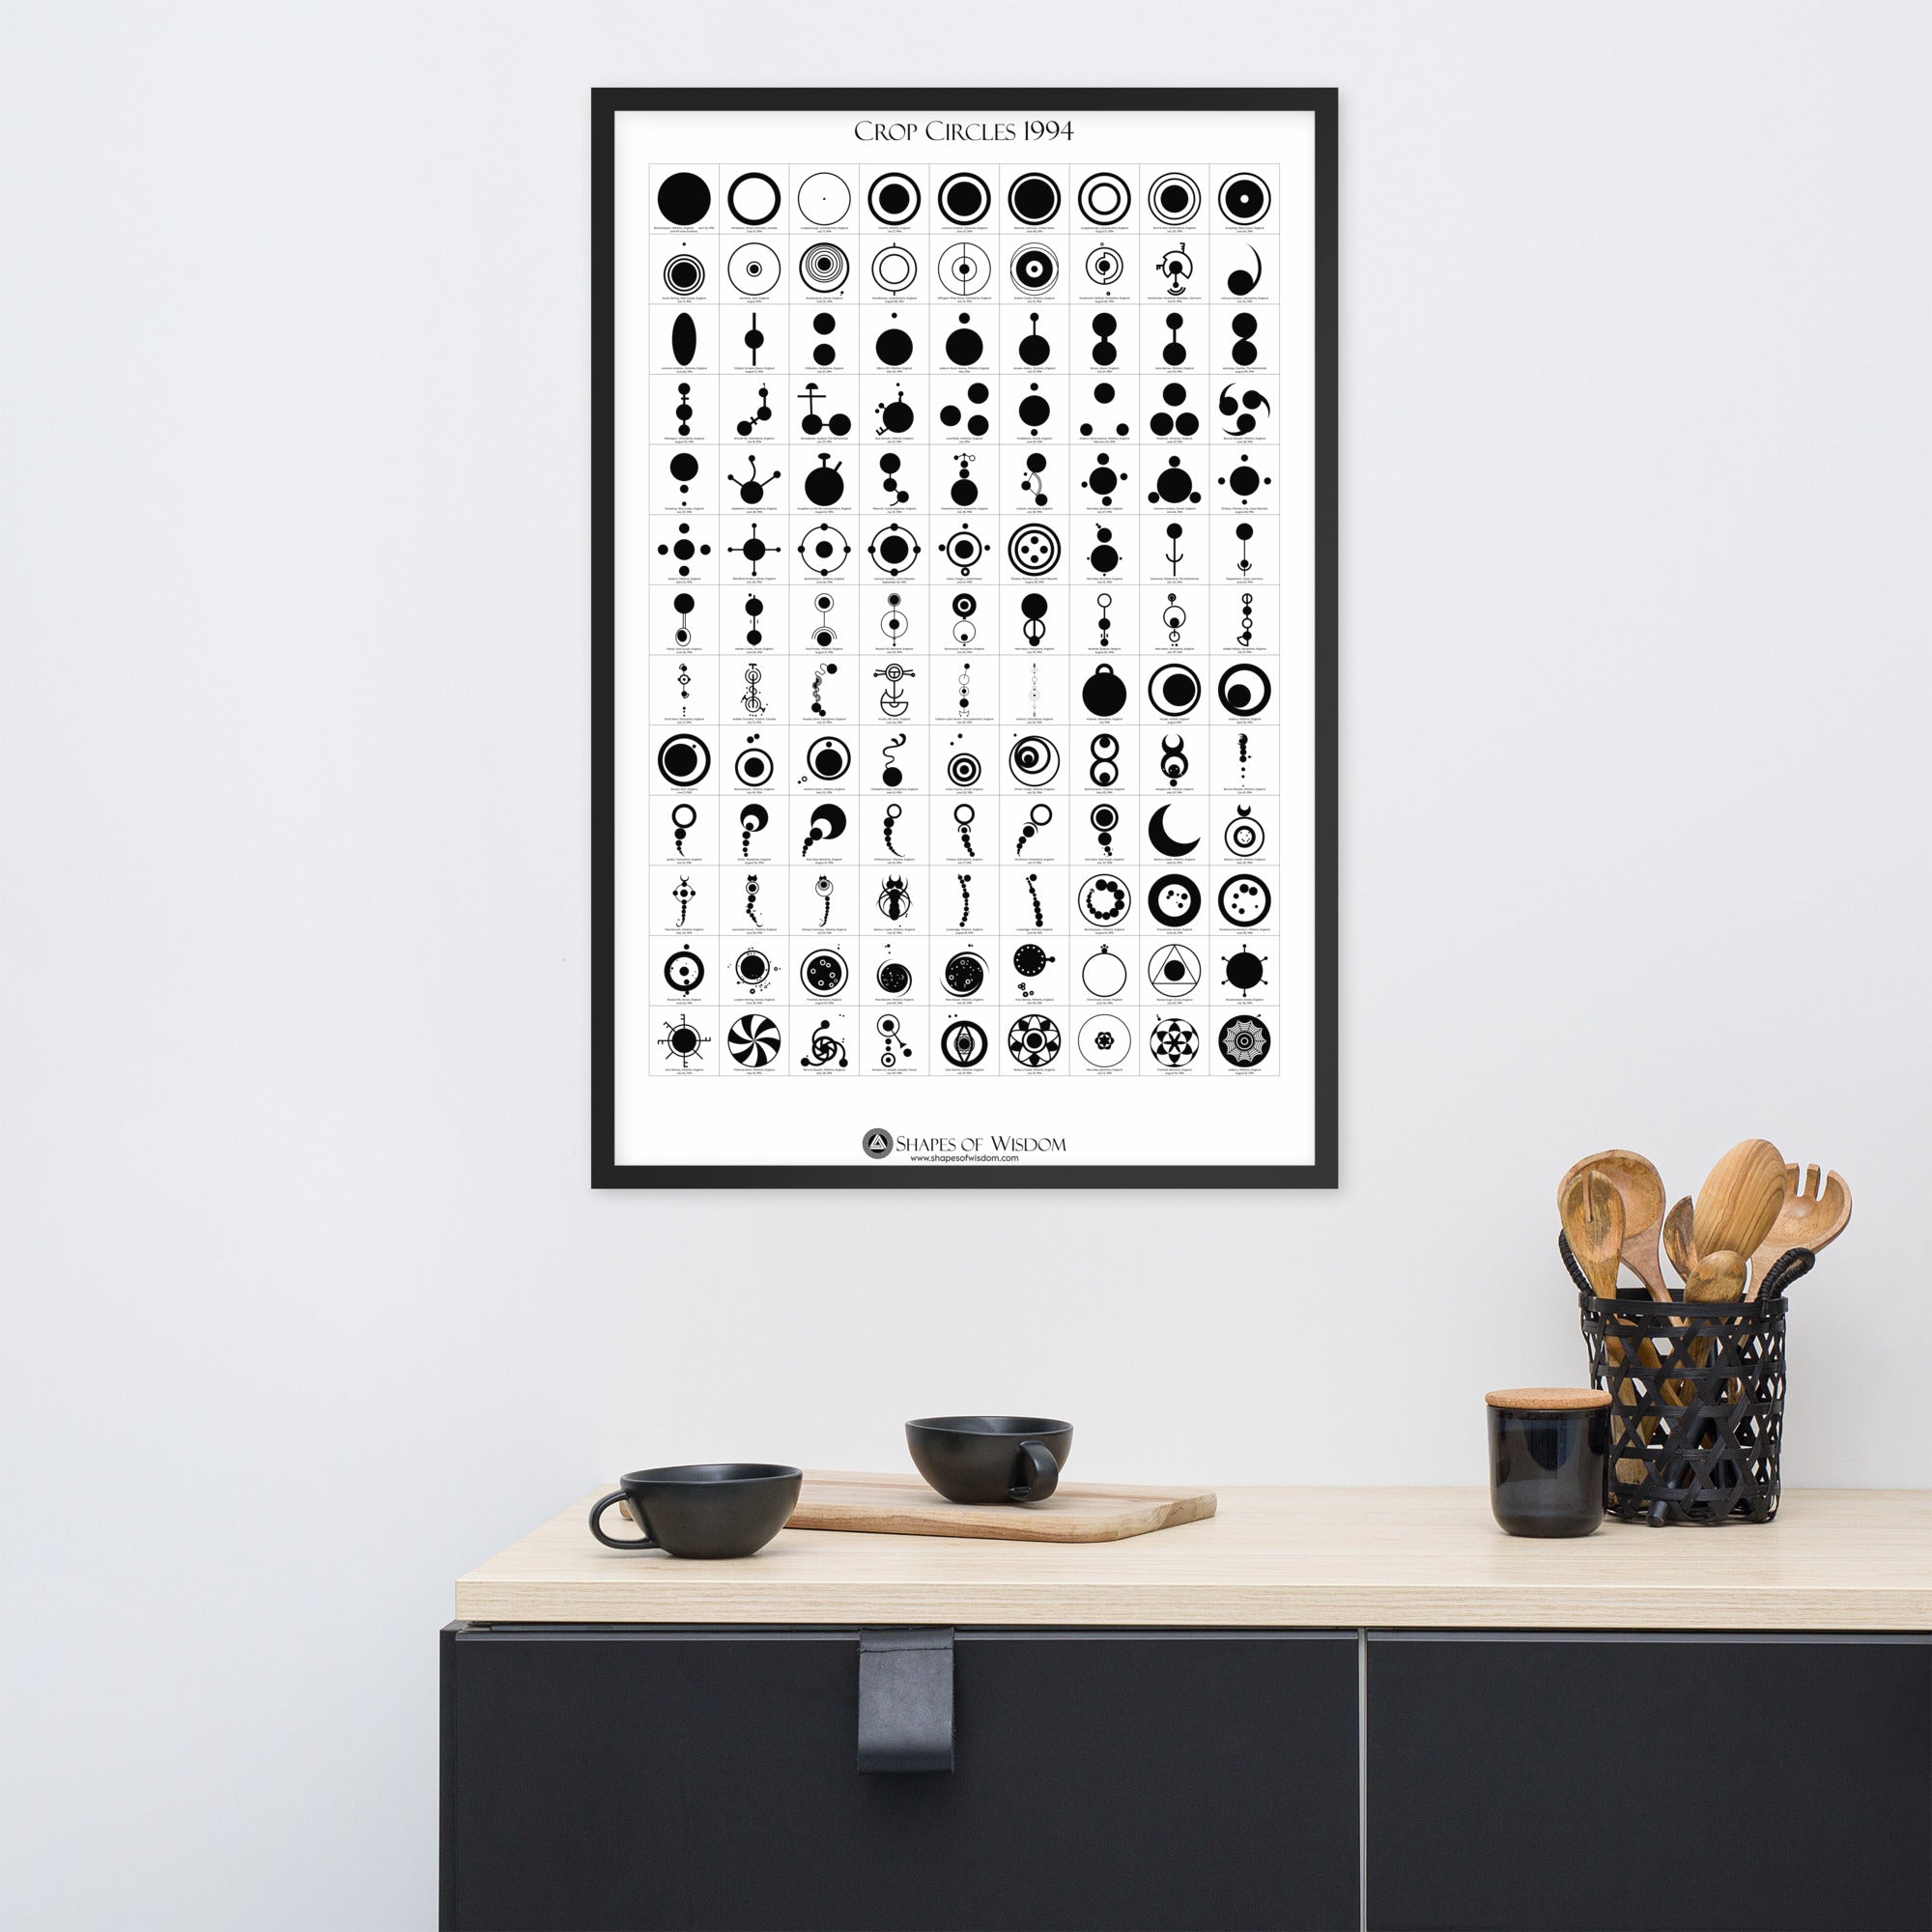 Crop Circles 1994 Framed Poster - Shapes of Wisdom